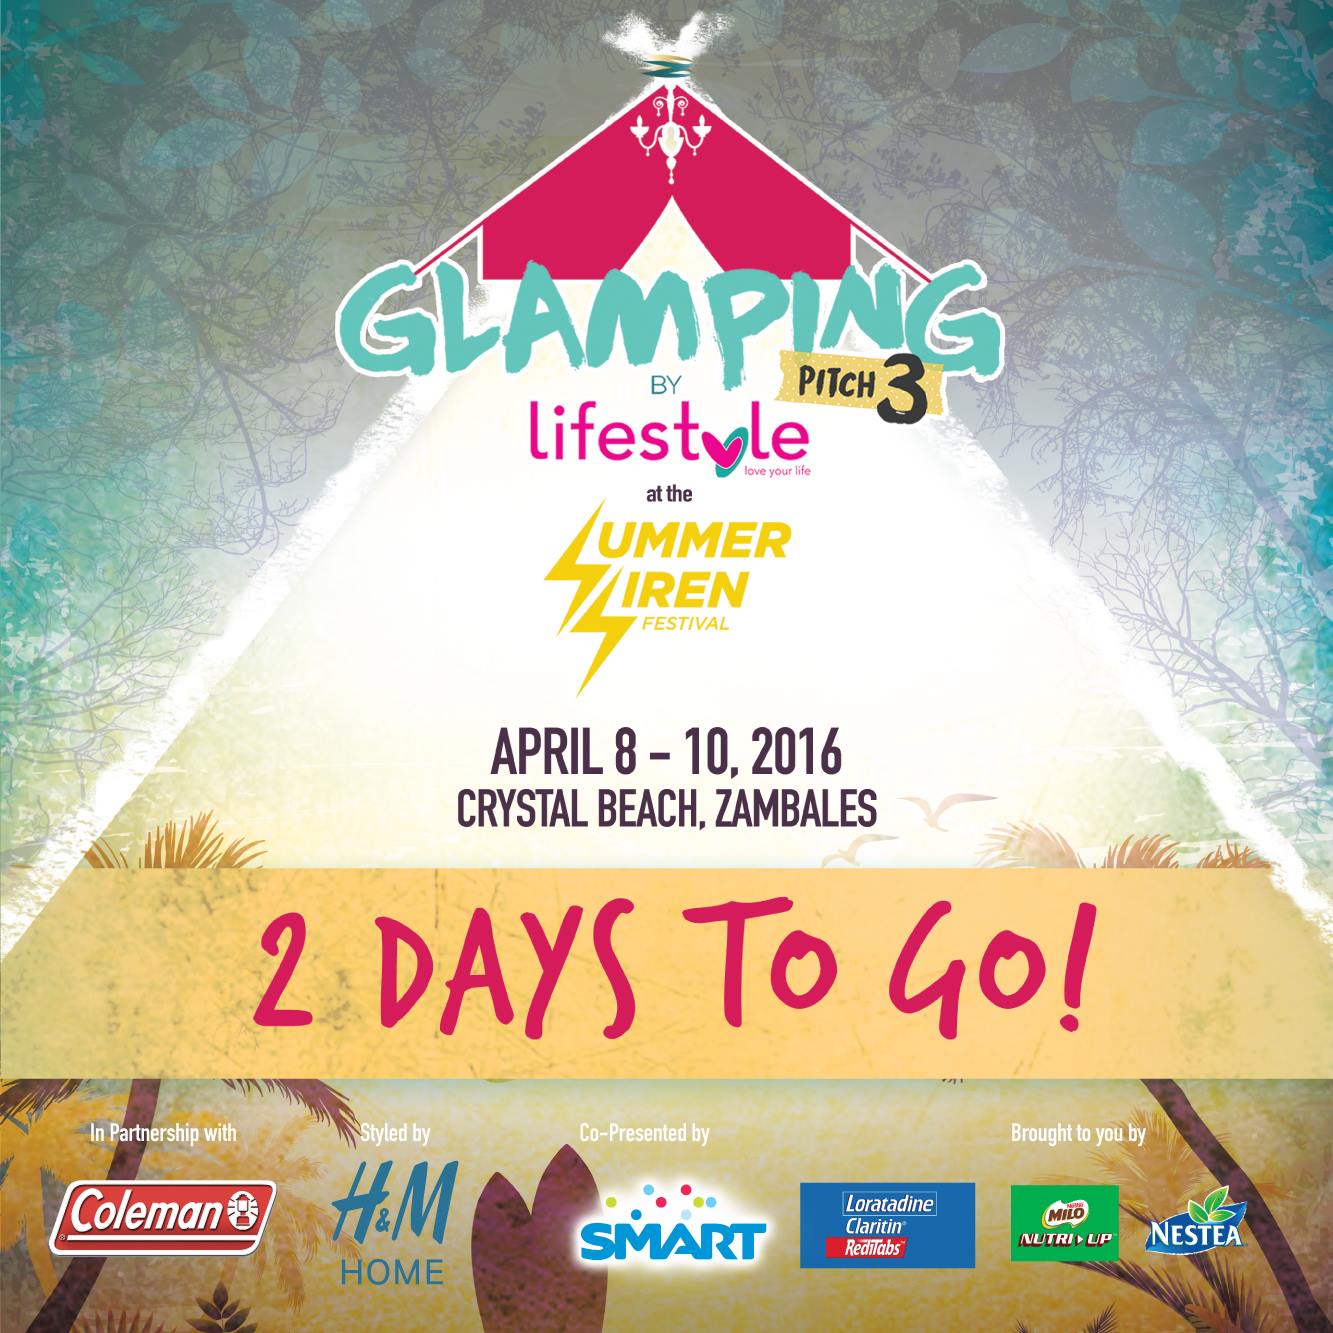 Glamping by Lifestyle Pitch 3 Sumemr Siren Festival Crystal Beach Zambales